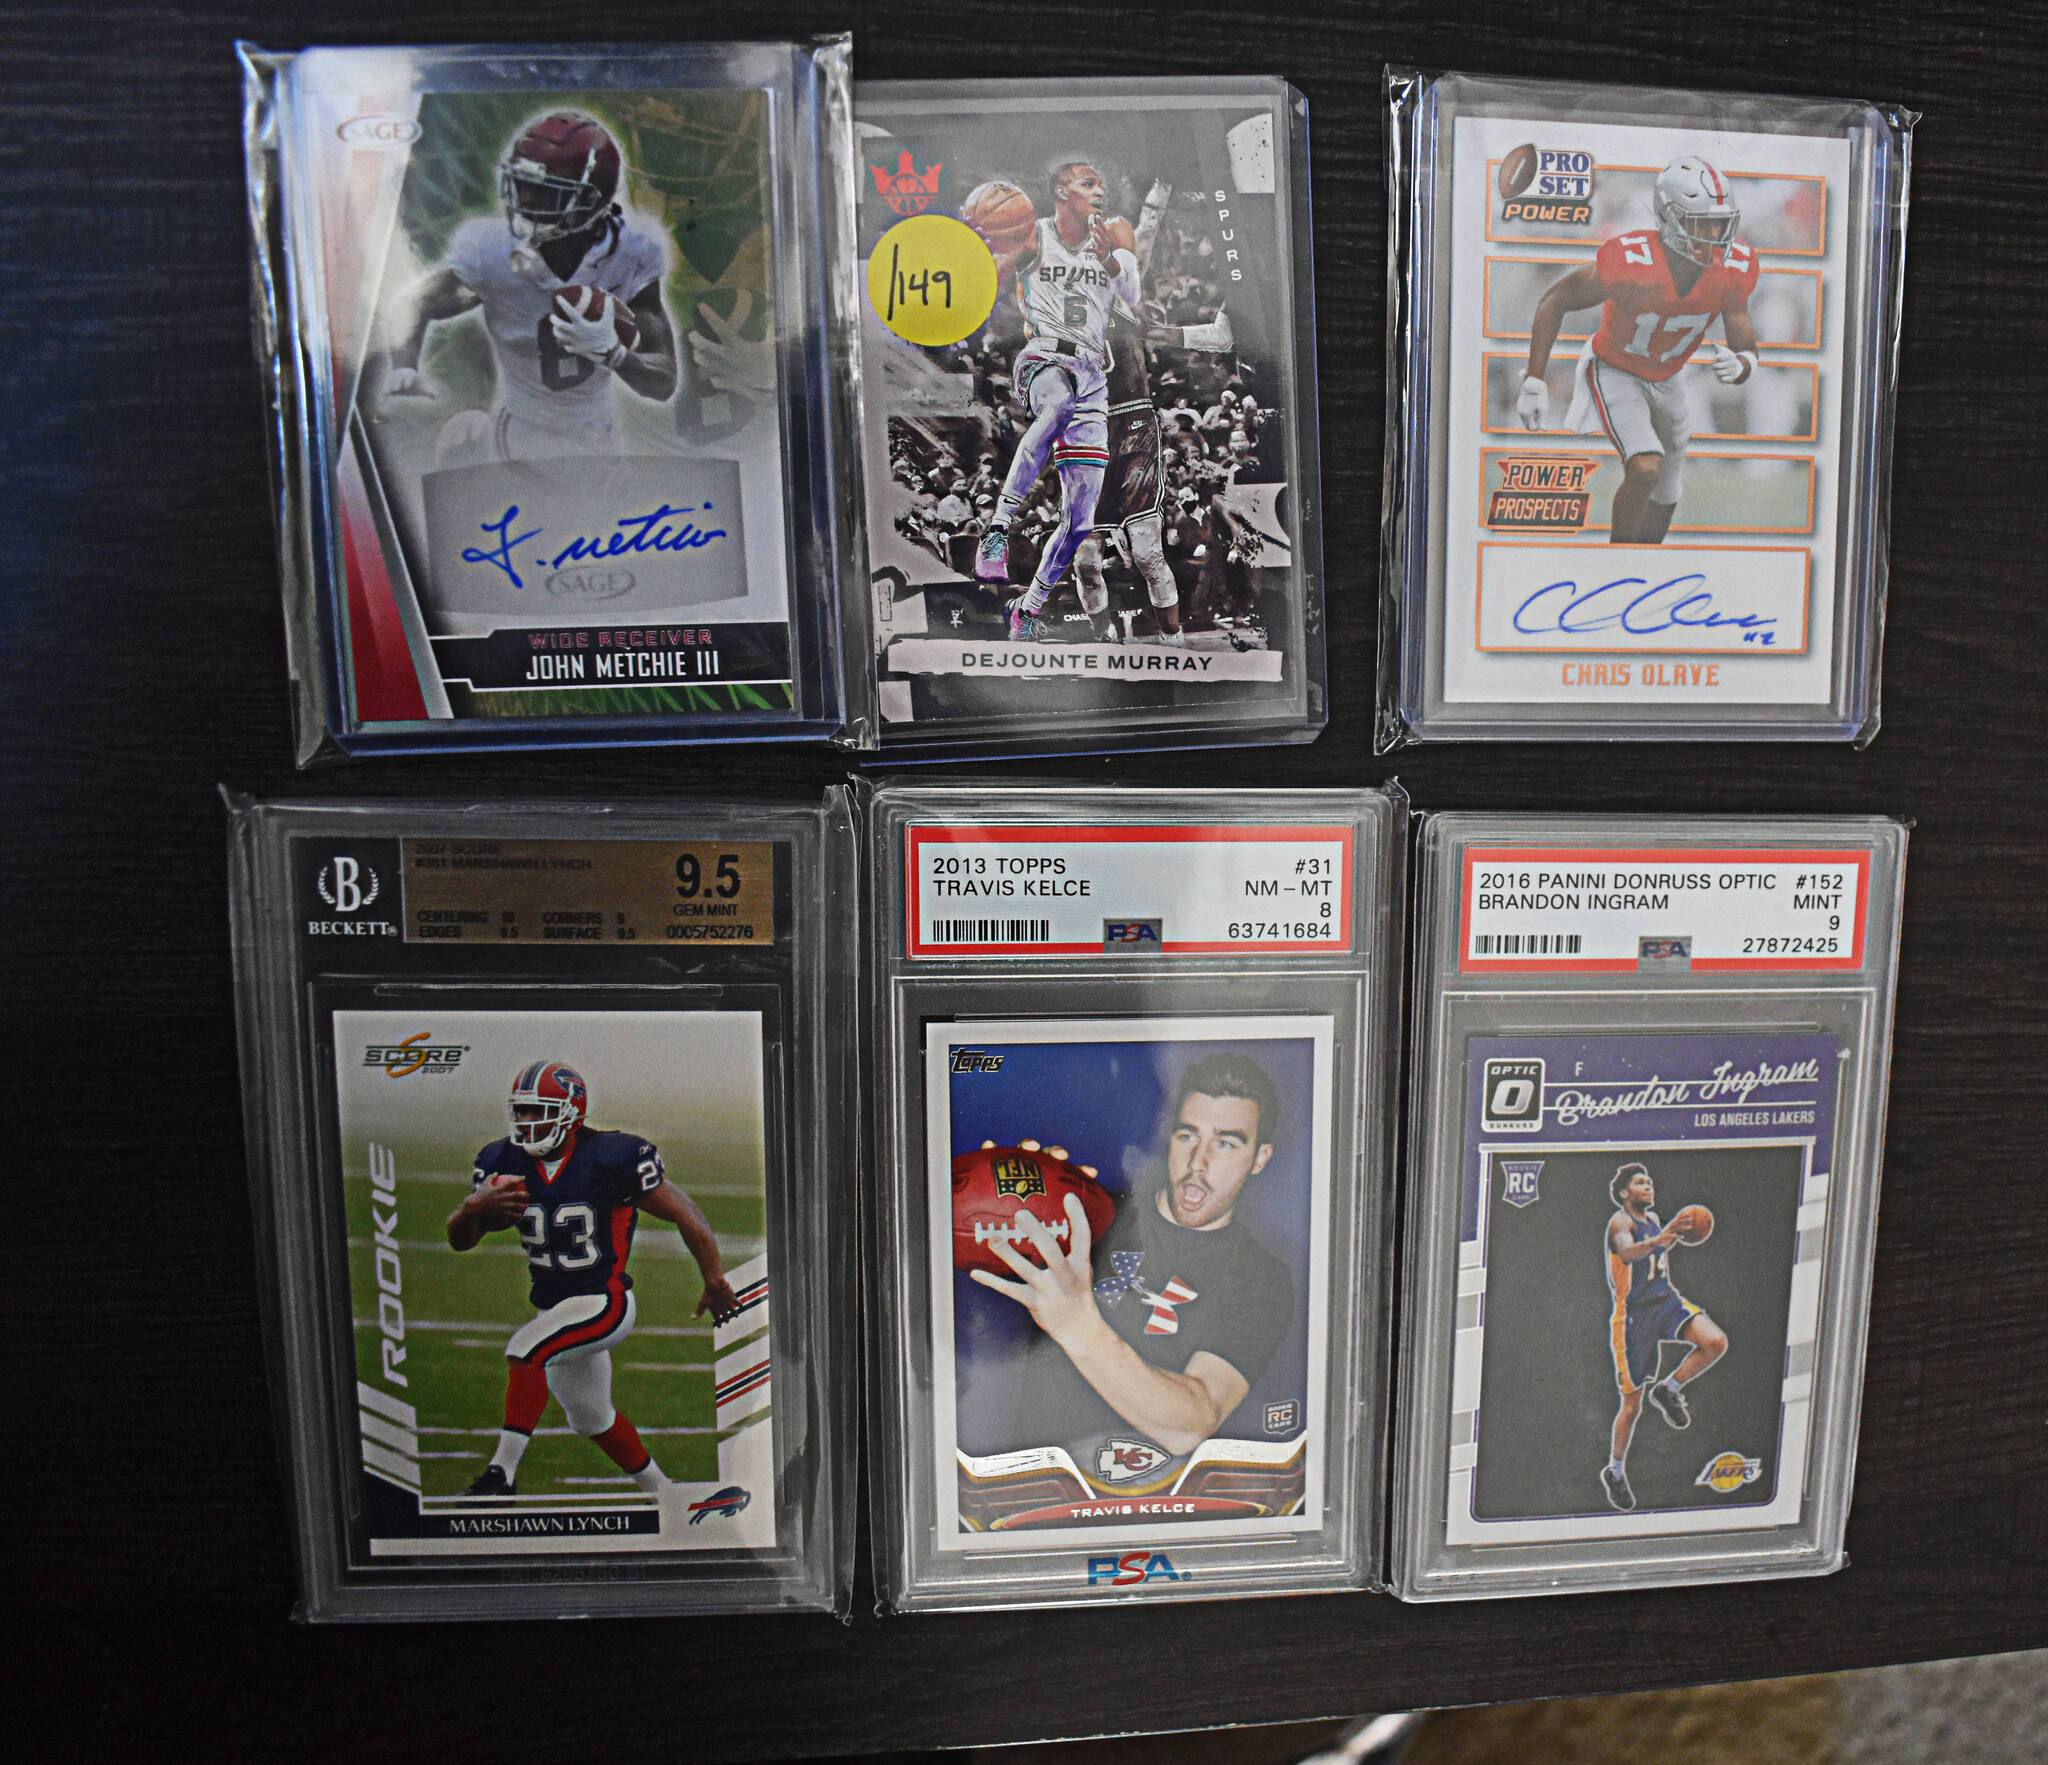 Some of the newest cards of the collection include a rookie Marshawn Lynch football card and an autographed NFL rookies card.